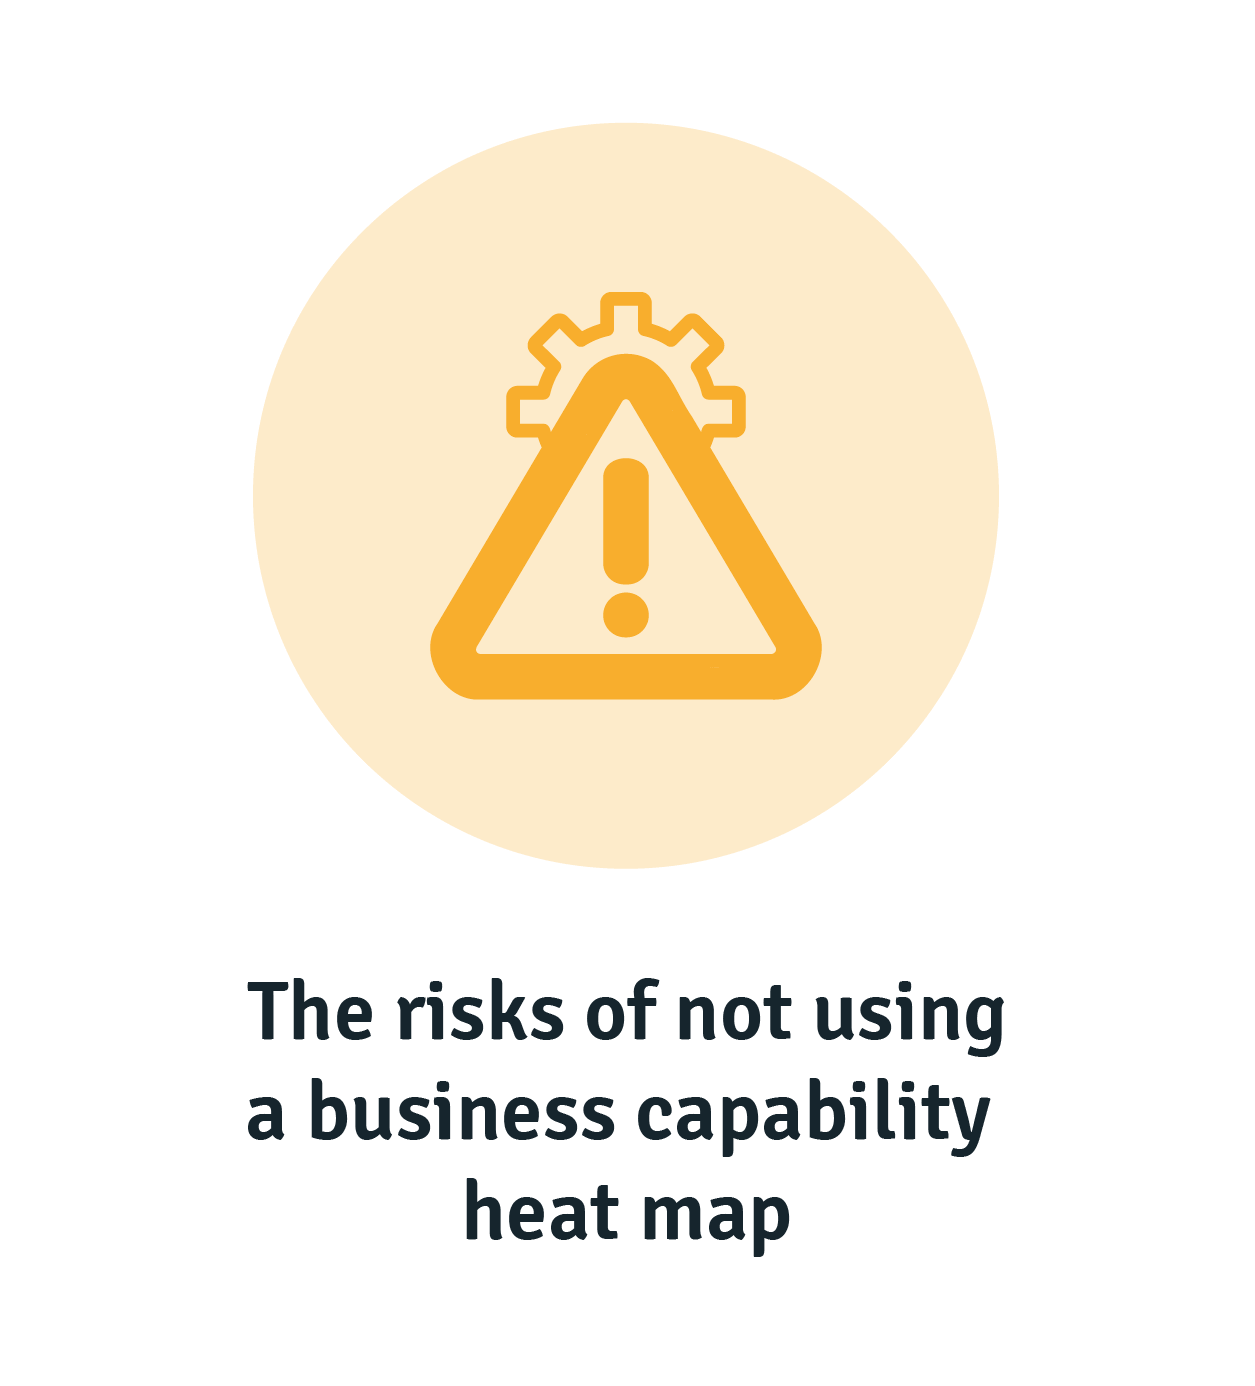 what are the risks of not using a business capability heat map?